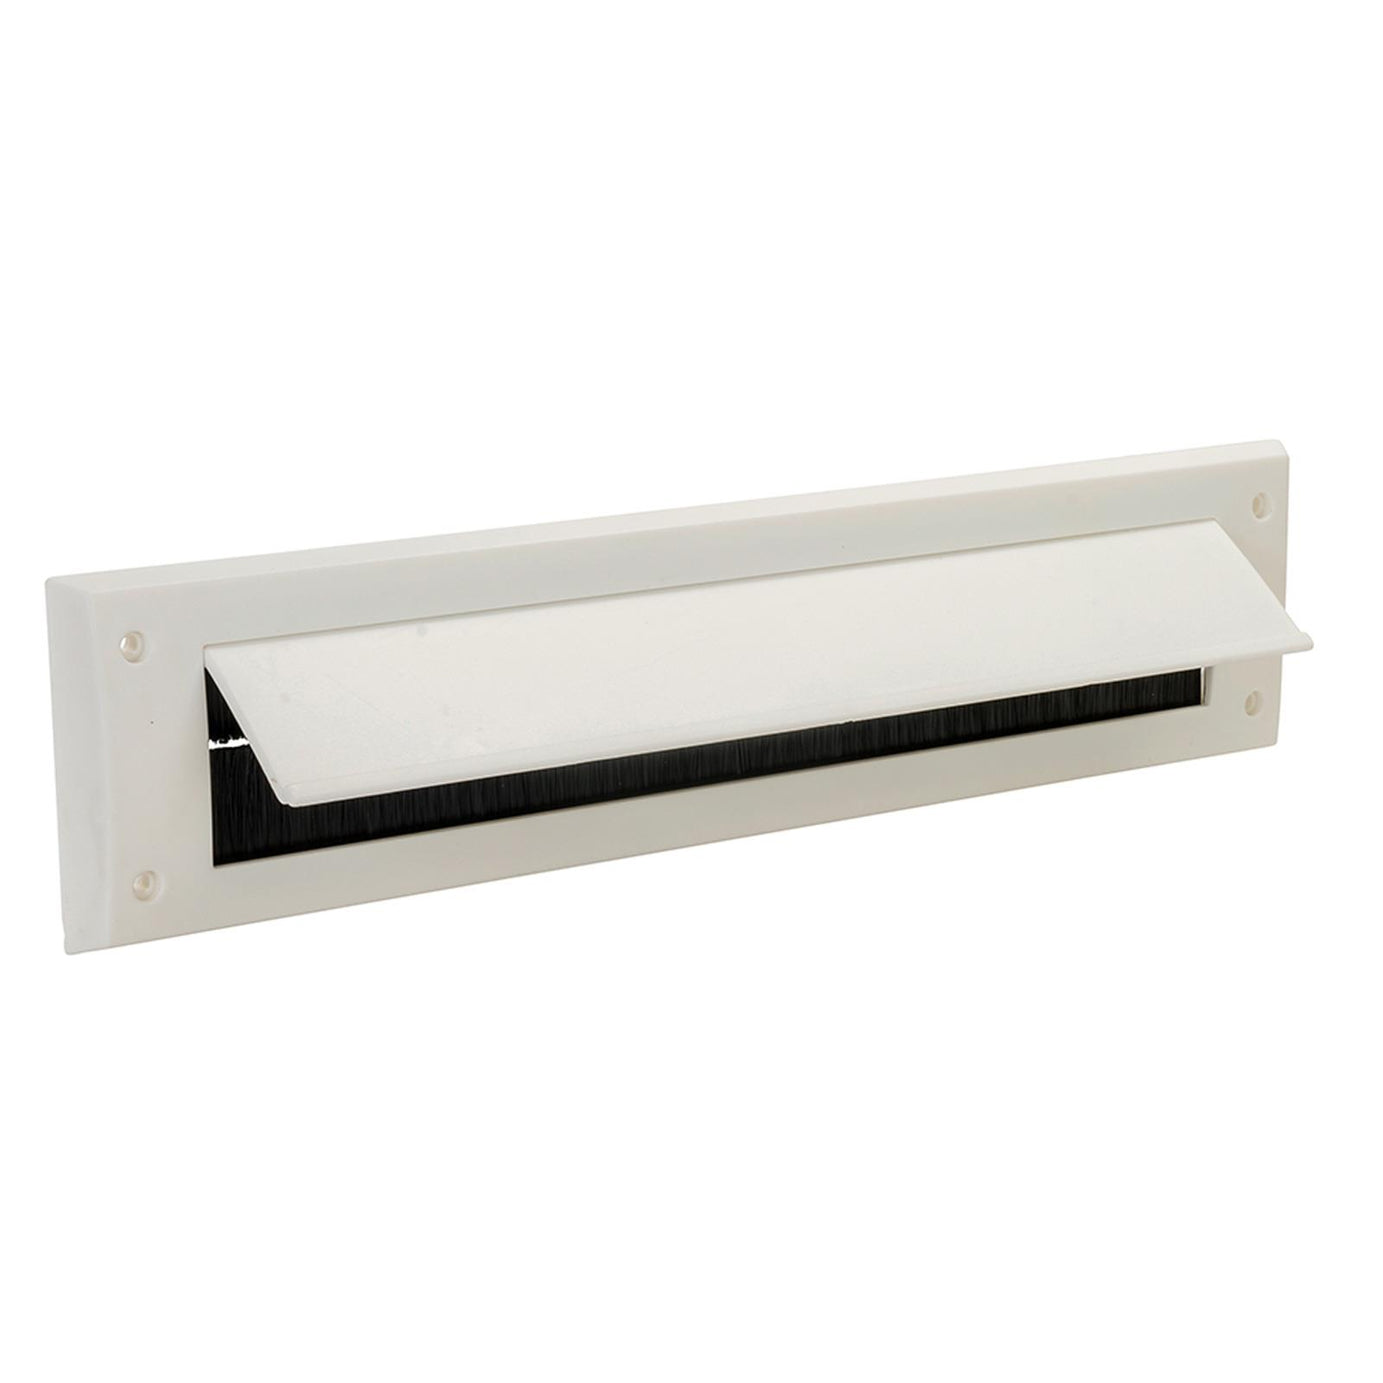 Letterbox Draught Seal With Flap - 338 X 78mm White Prevents Draughts & Dust